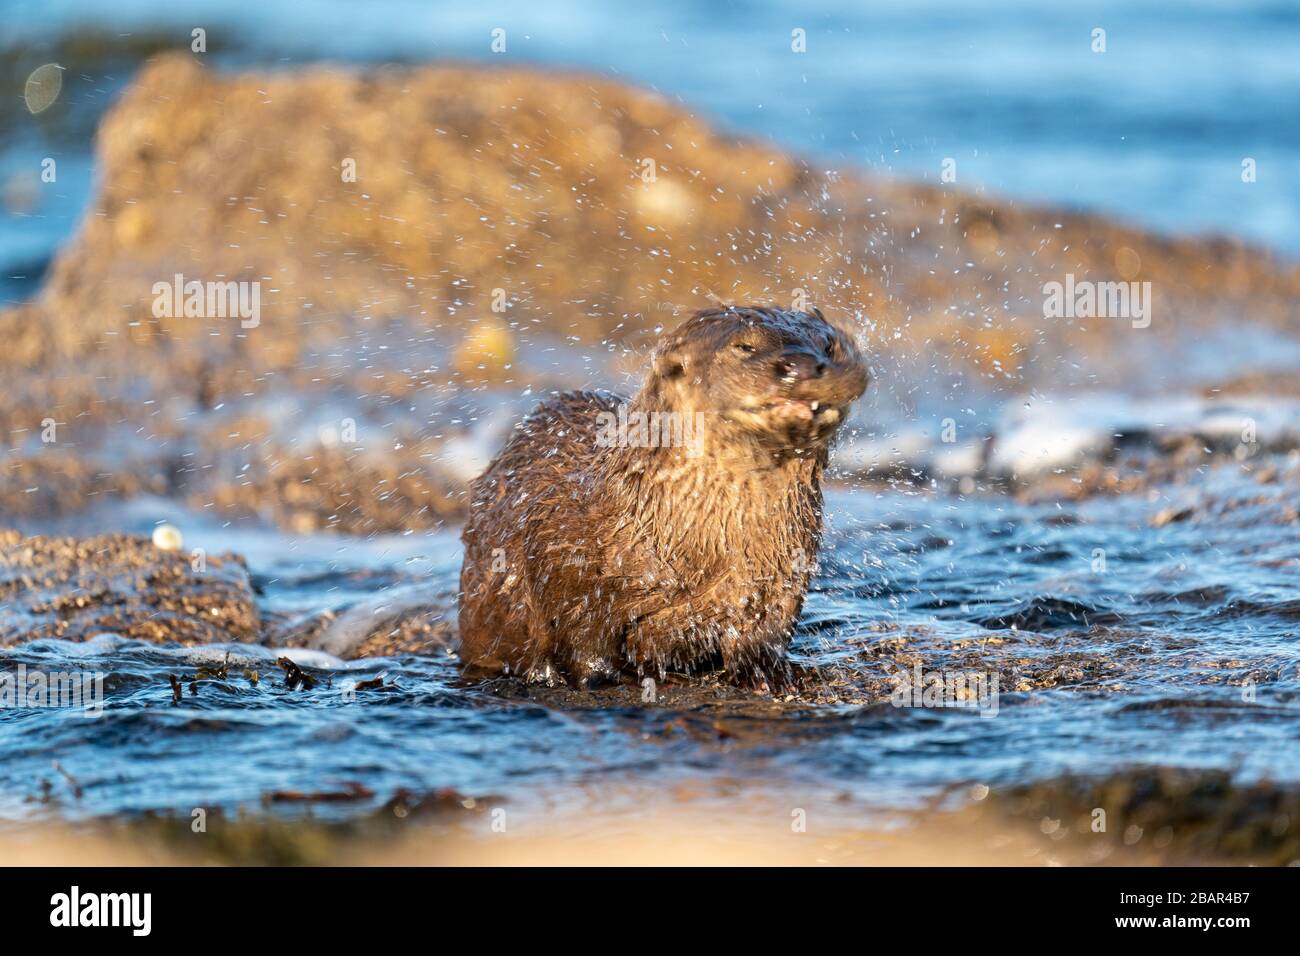 Close up of European Otter cub or kit (Lutra lutra) shaking itself dry standing in shallow water with motion blur and radiating spray Stock Photo